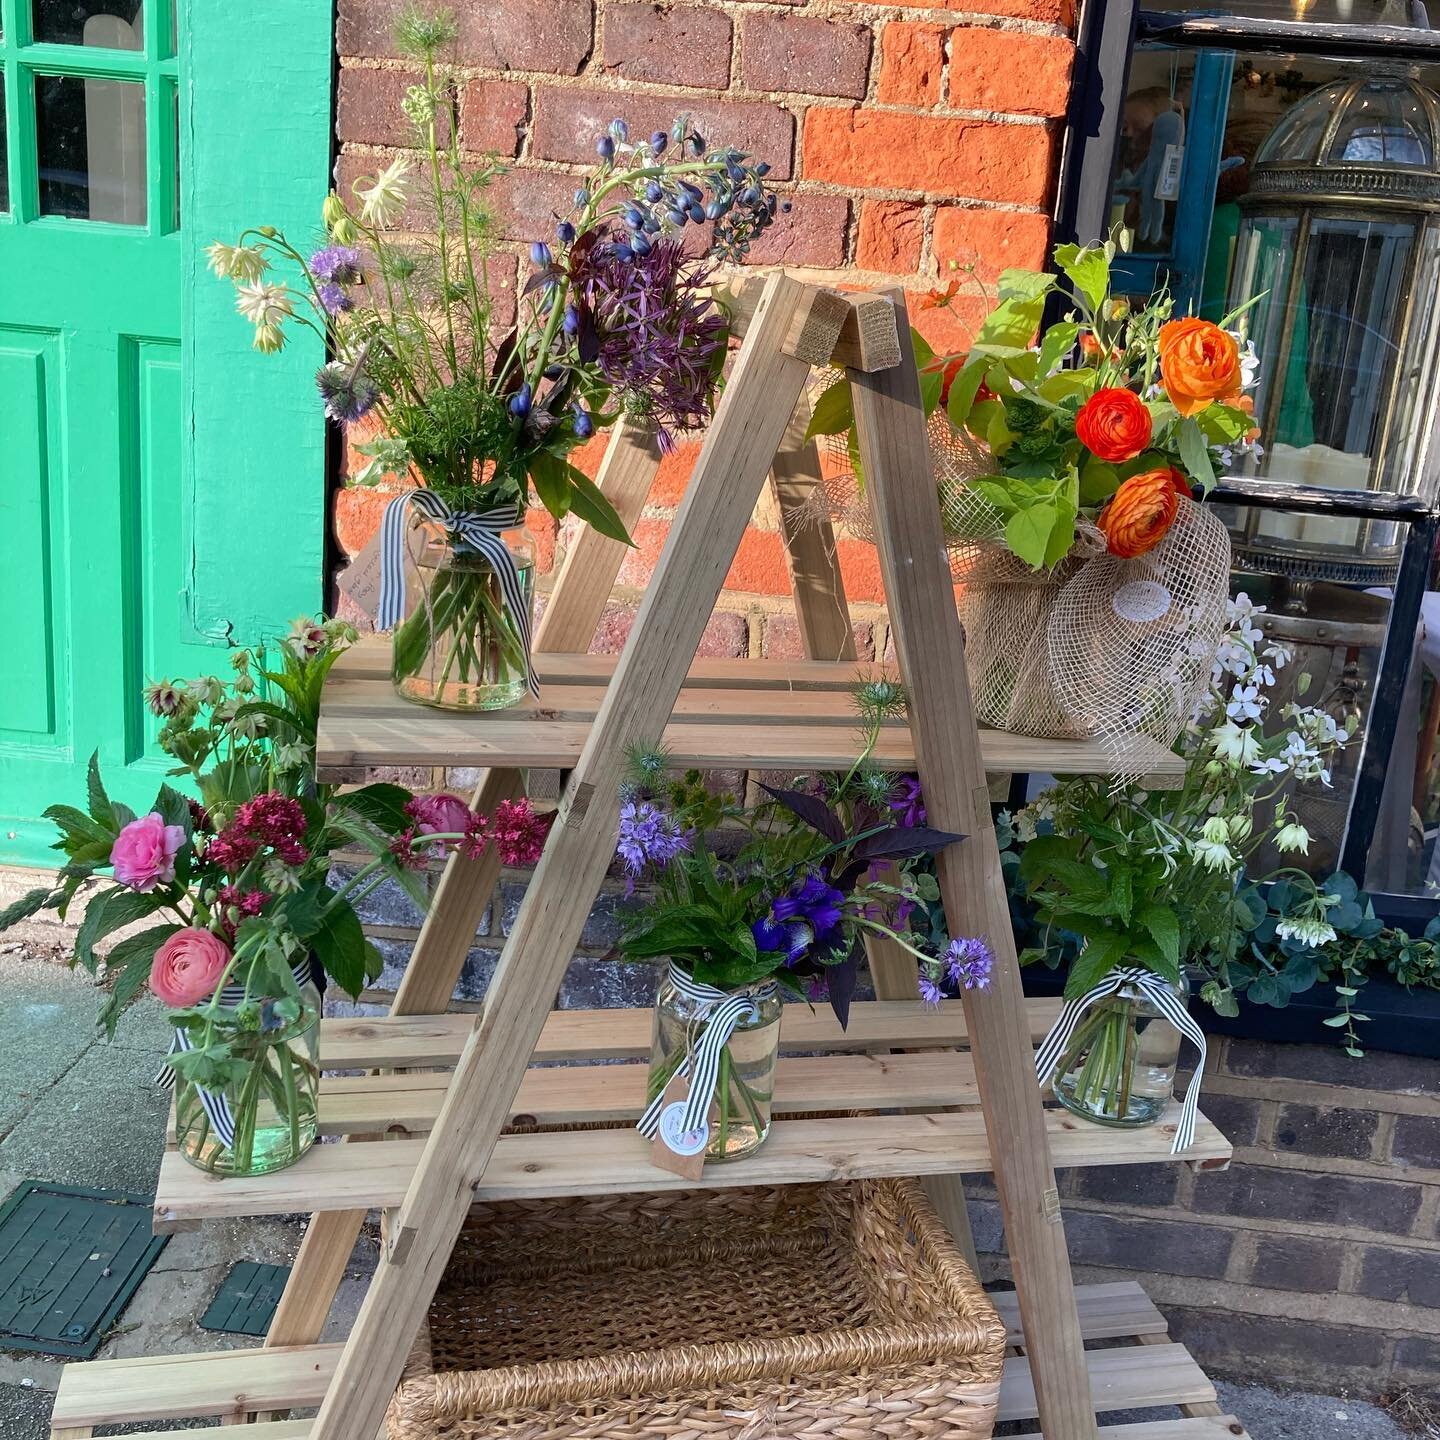 Gorgeous #britishflowers grown by the wonderful @plot31flowers in Harpenden and arranged into grab and go posys in recycled glass vases by me and for sale in the amazing new pop up at 8 Leyton Road (opposite Waitrose) in Harpenden. Visit and see some